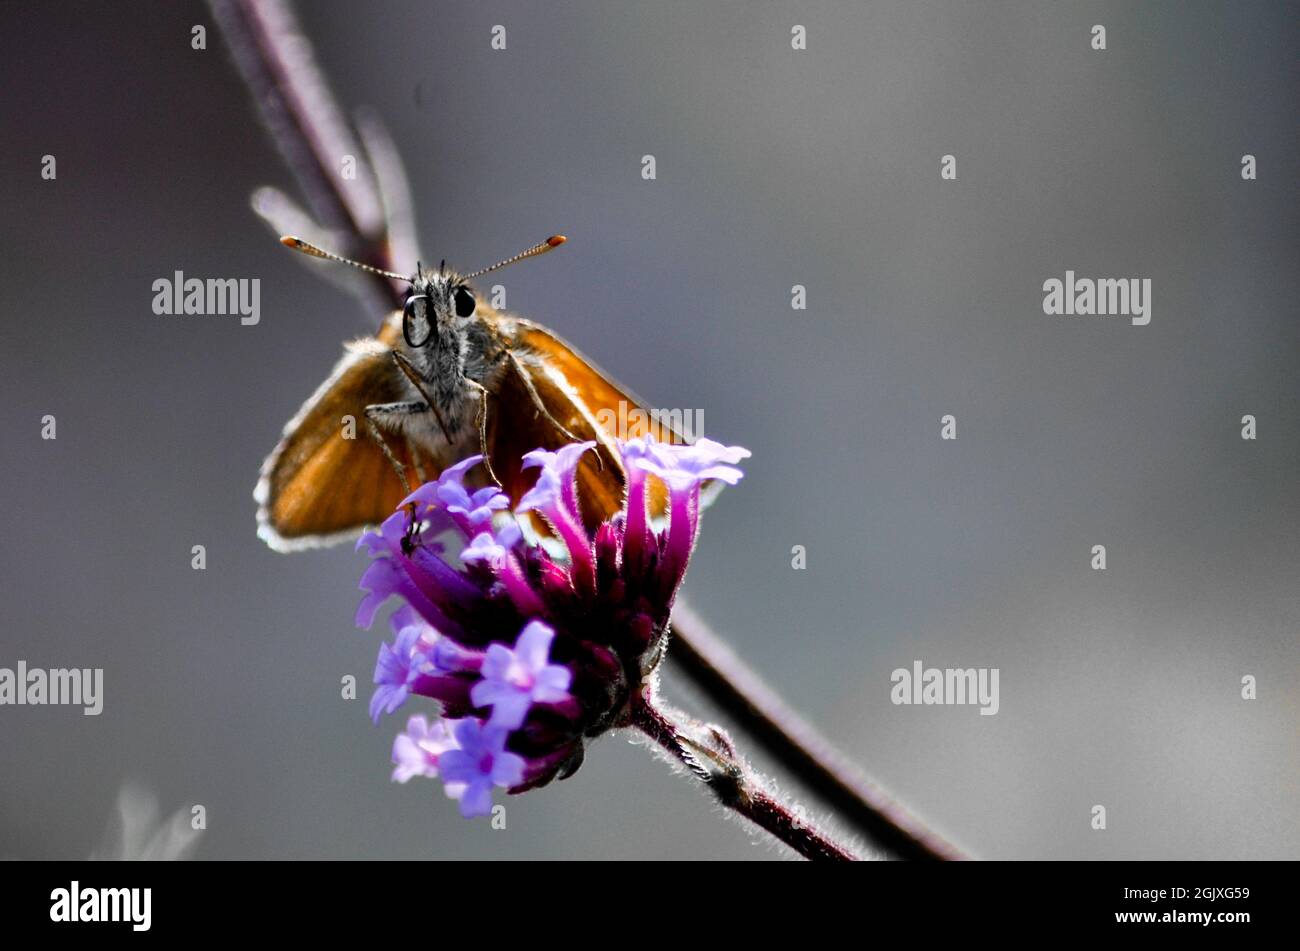 Essex Skipper butterfly (Thymelicus lineola) sitting on a purple verbena bonariensis. Copy space is available Stock Photo